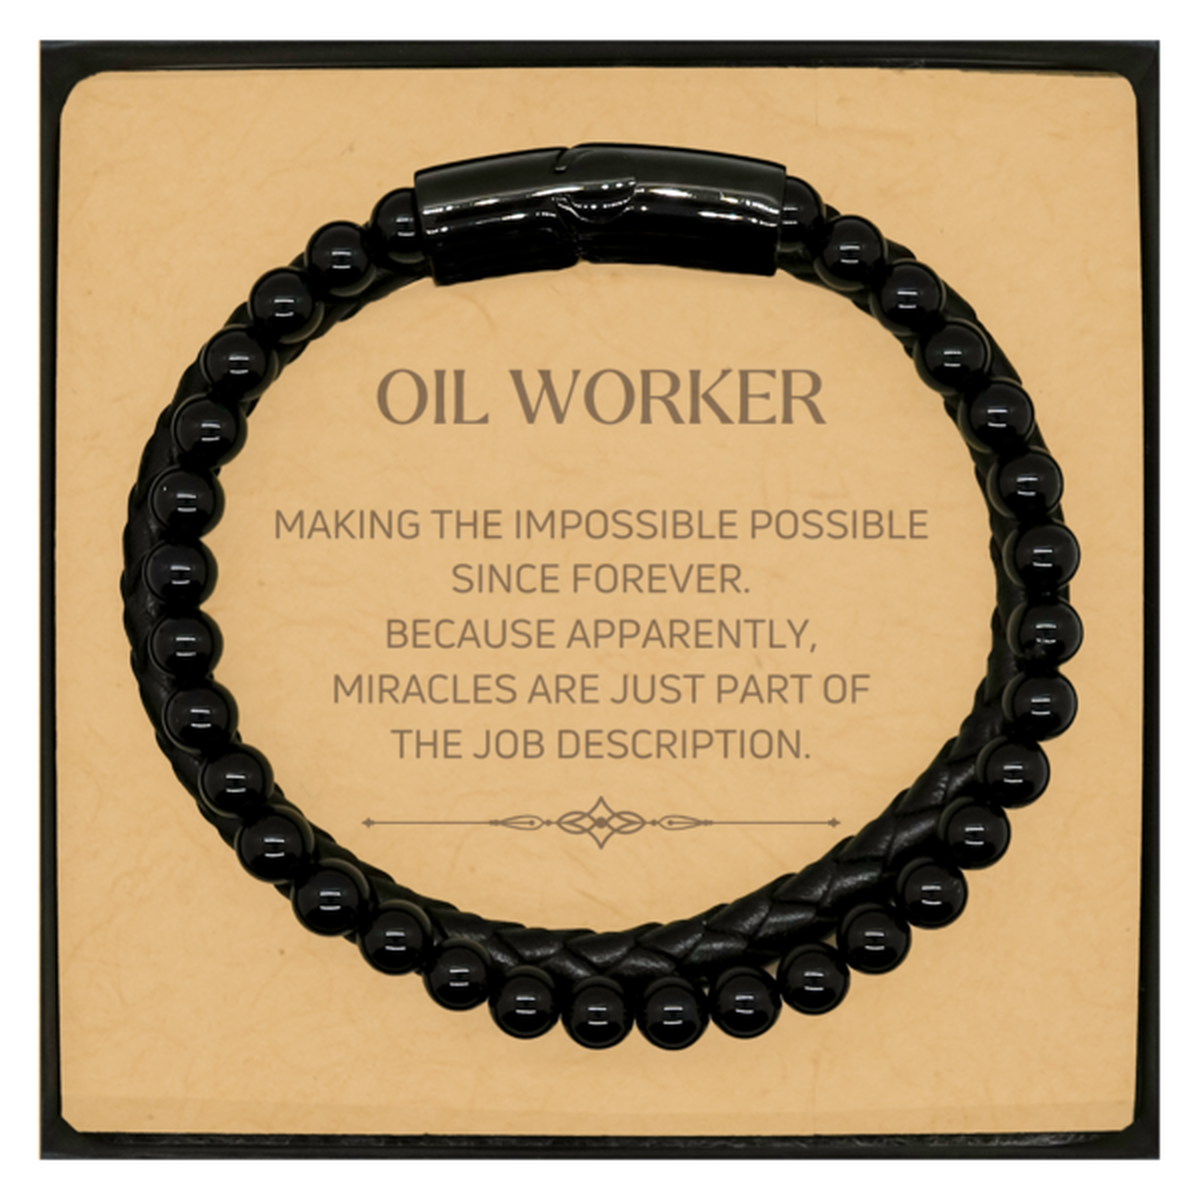 Funny Oil Worker Gifts, Miracles are just part of the job description, Inspirational Birthday Christmas Stone Leather Bracelets For Oil Worker, Men, Women, Coworkers, Friends, Boss